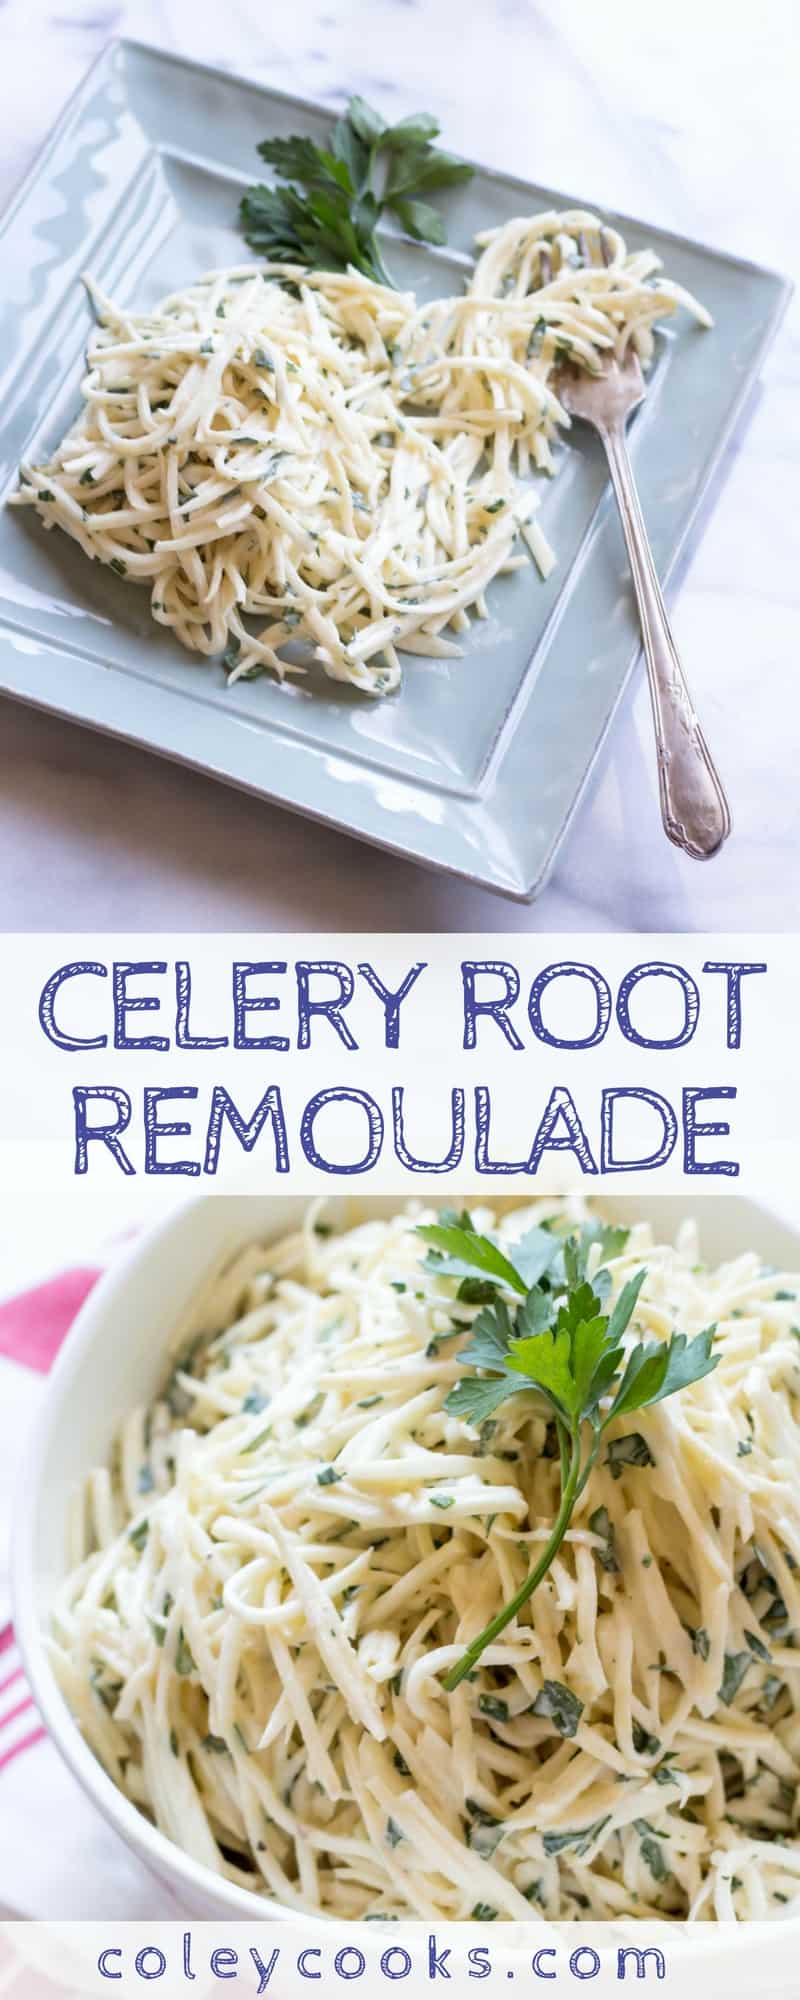 CELERY ROOT REMOULADE | Crisp and refreshing side to serve with sandwiches, meats, fish, and more! It's like a fancy cousin of Coleslaw. #glutenfree #vegetarian | ColeyCooks.com